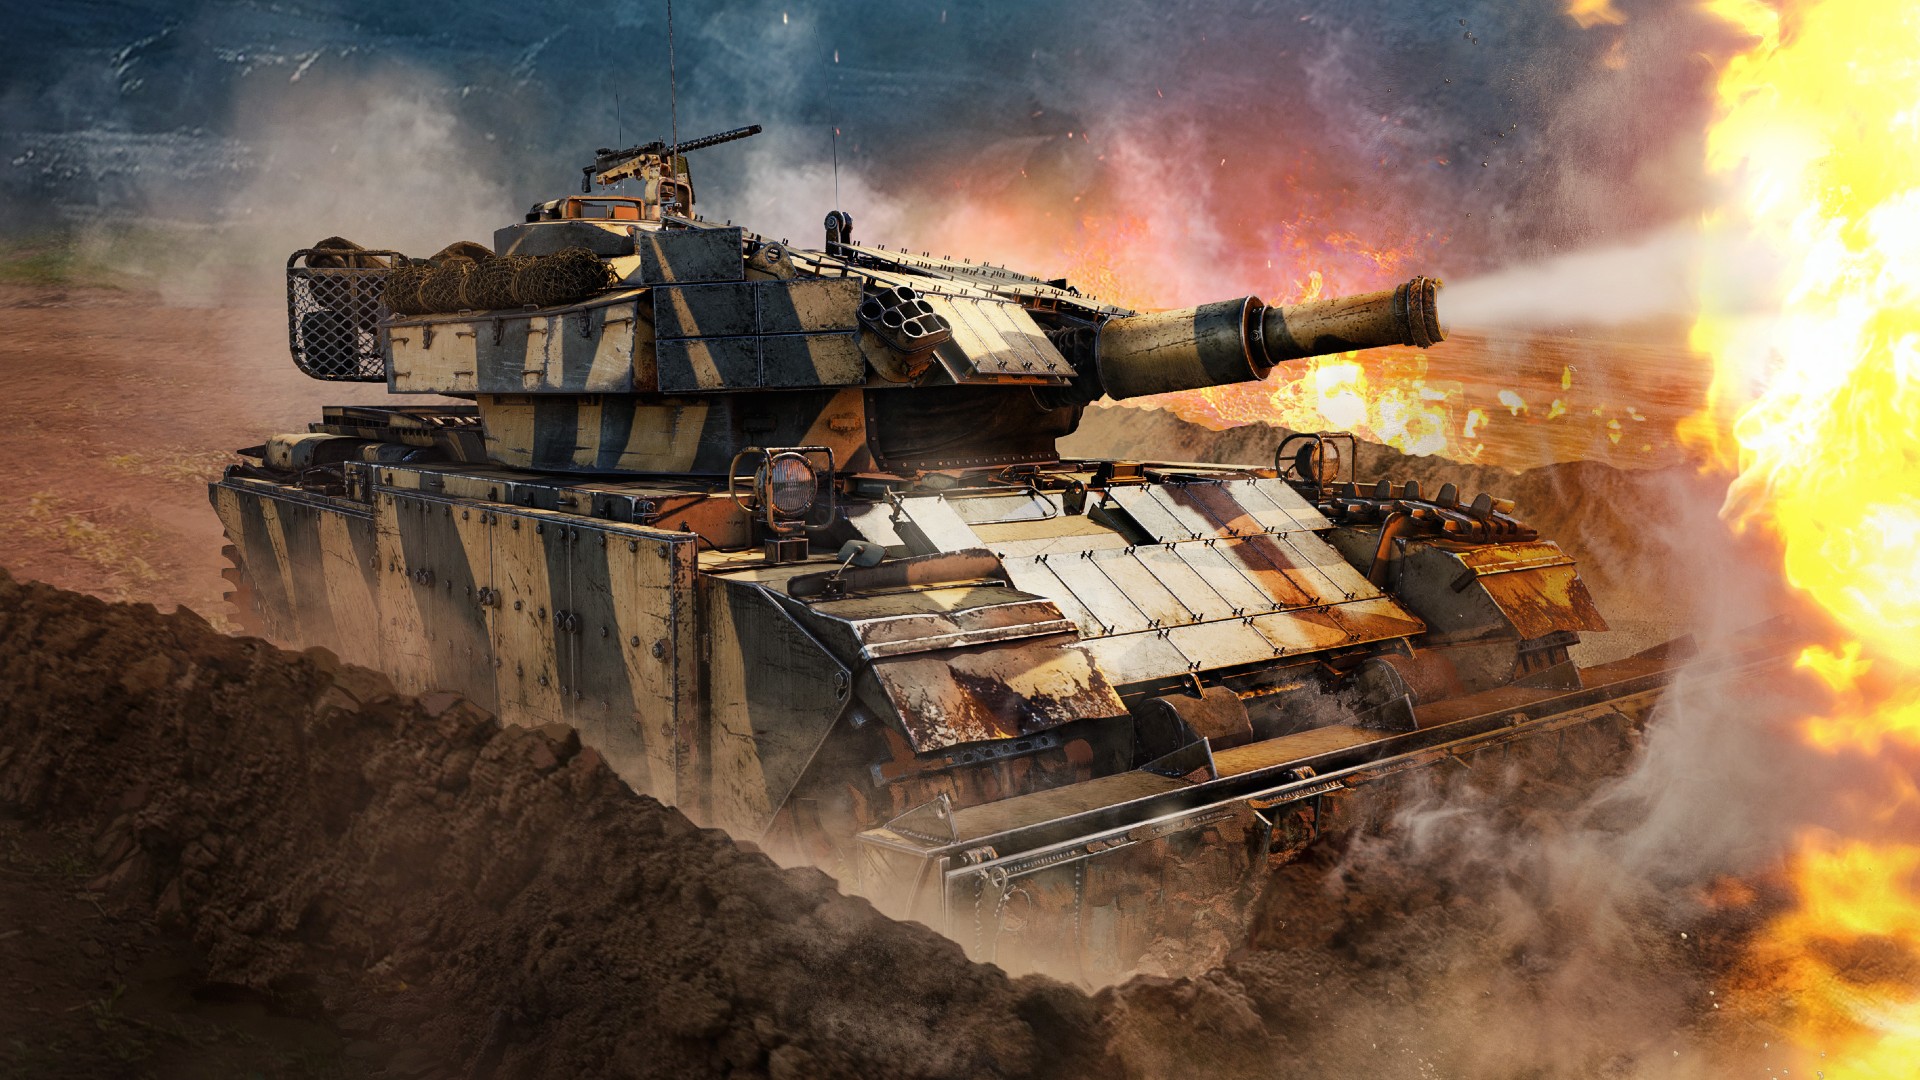 War Thunder's Ground Breaking update brings a huge new season of content